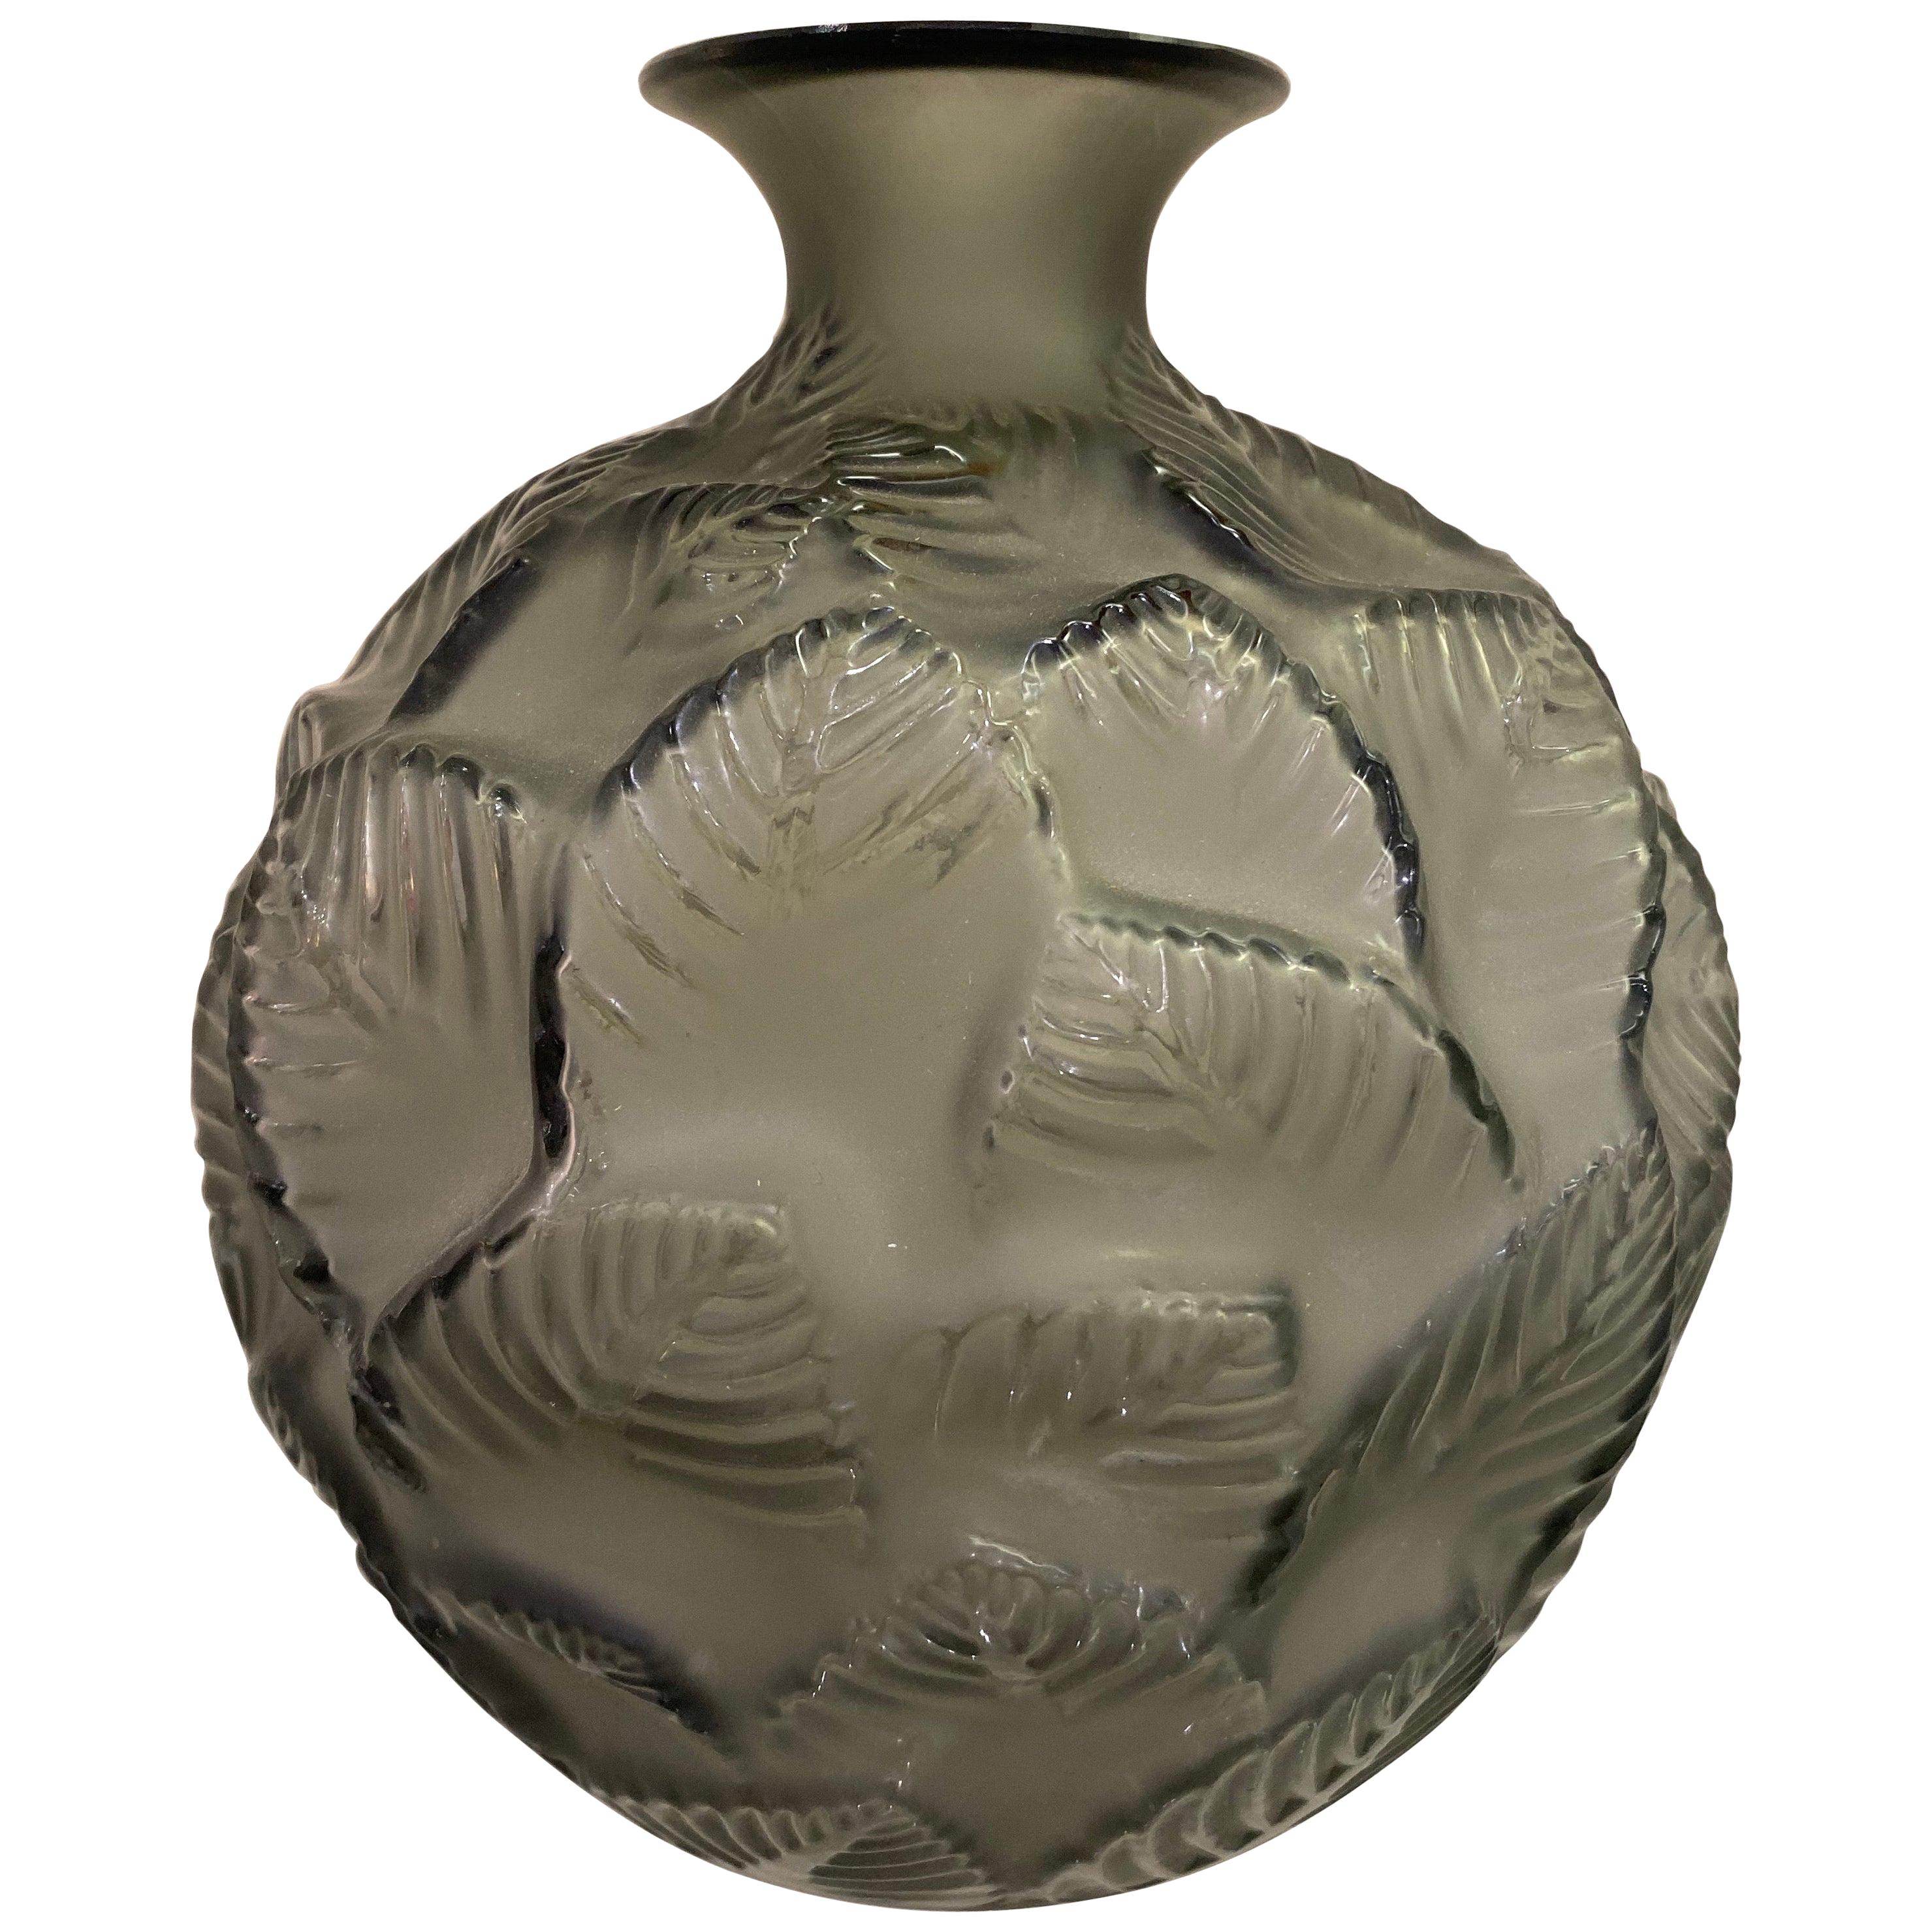 1926 René Lalique Ormeaux Vase in Grey Smoked Glass